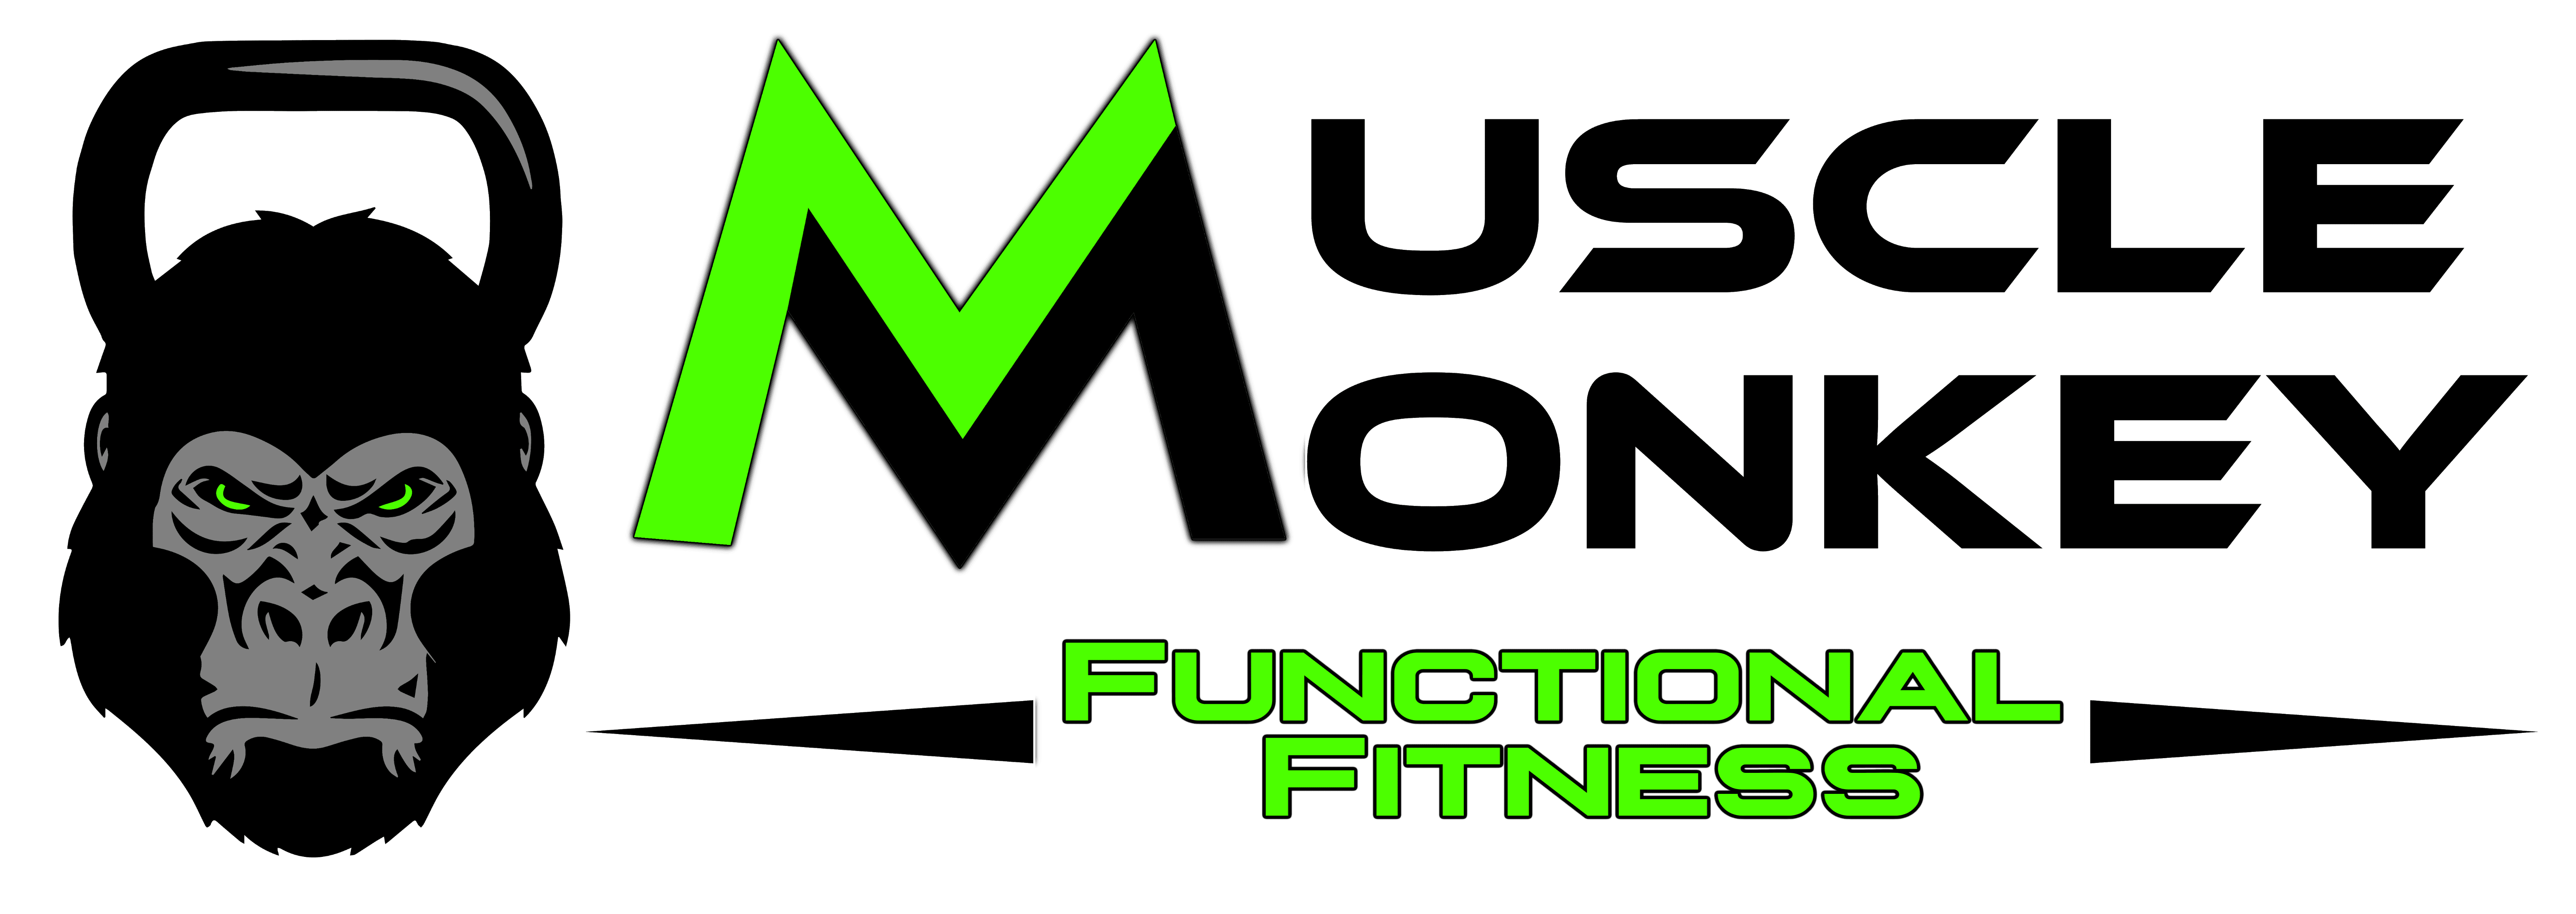 Muscle Monkey Functional Fitness